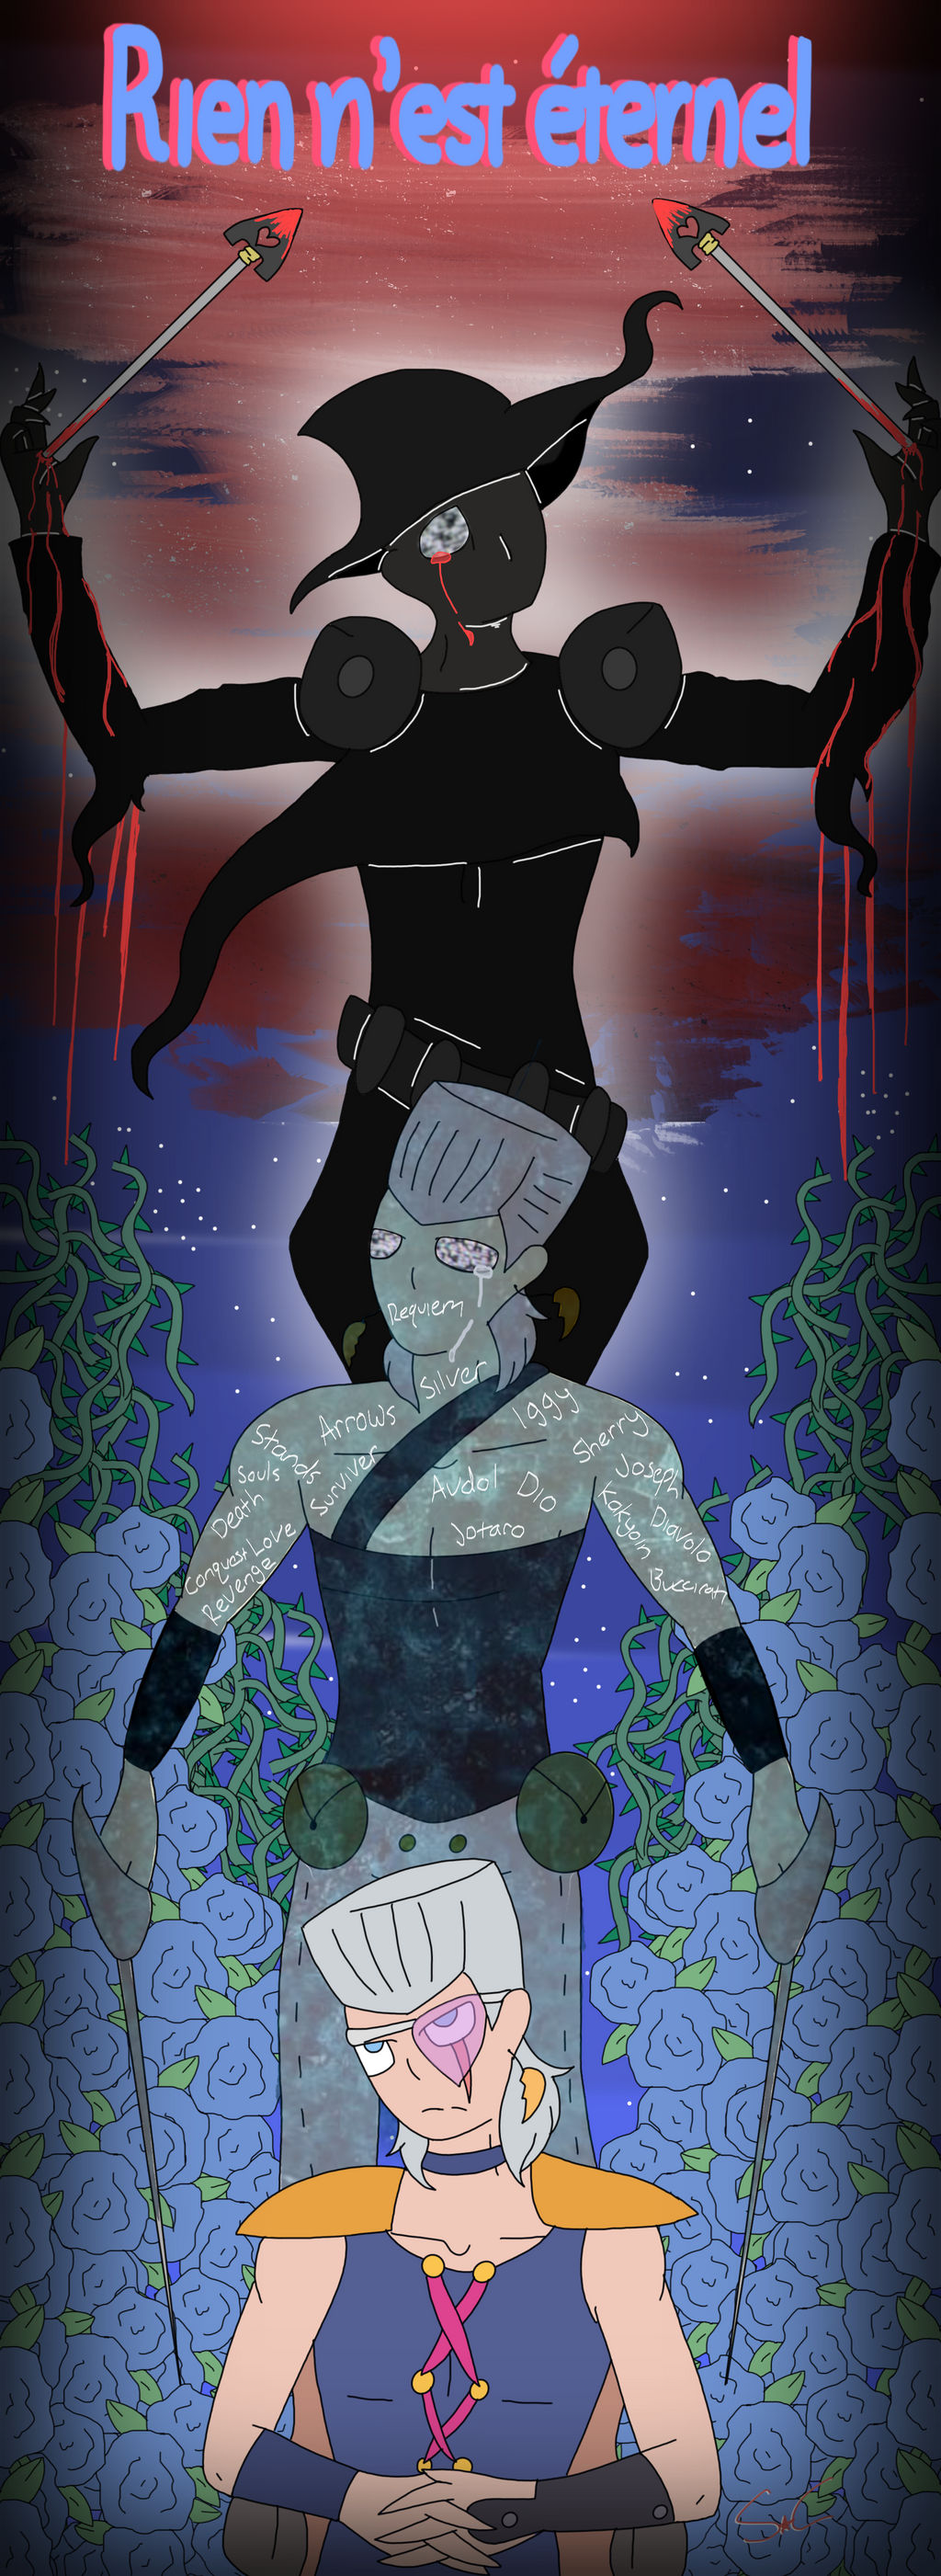 J.P.Polnareff , silver chariot and Requiem by rochiny on DeviantArt